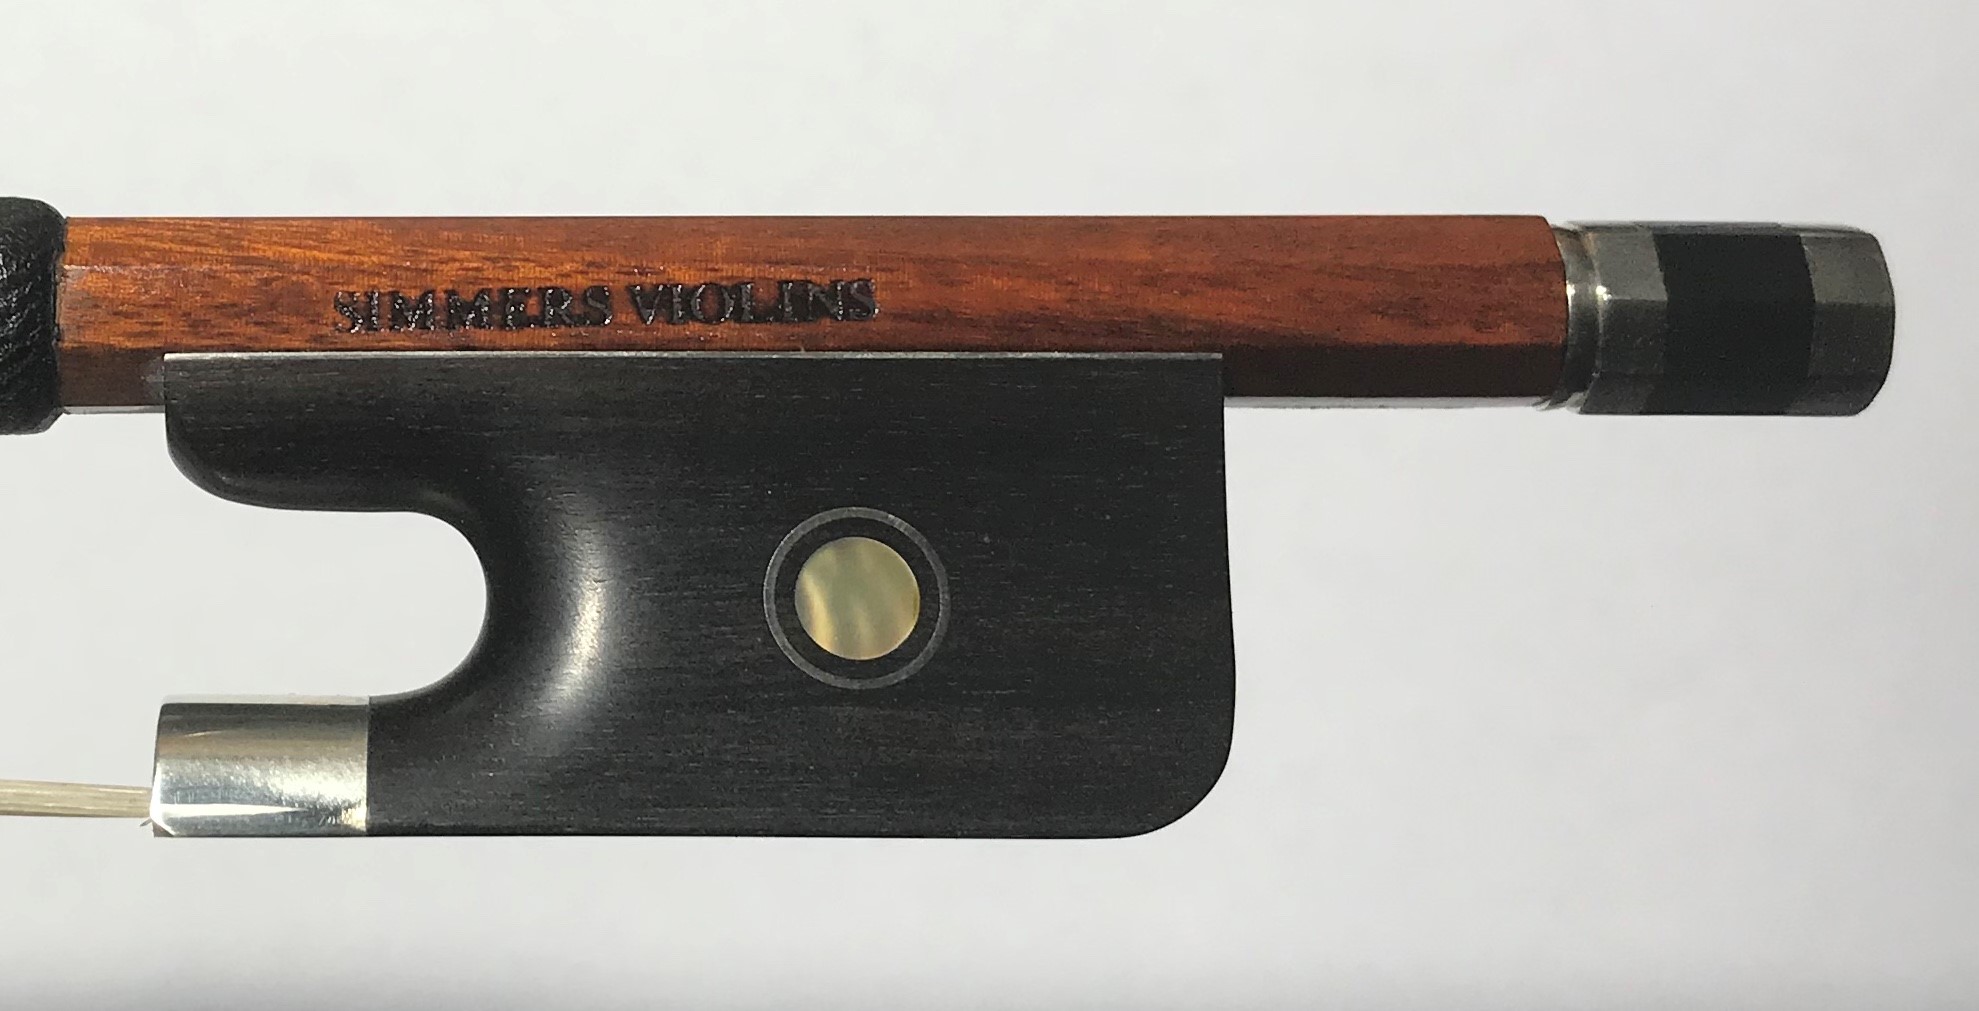 Simmers Violins – nickel mounted cello bow